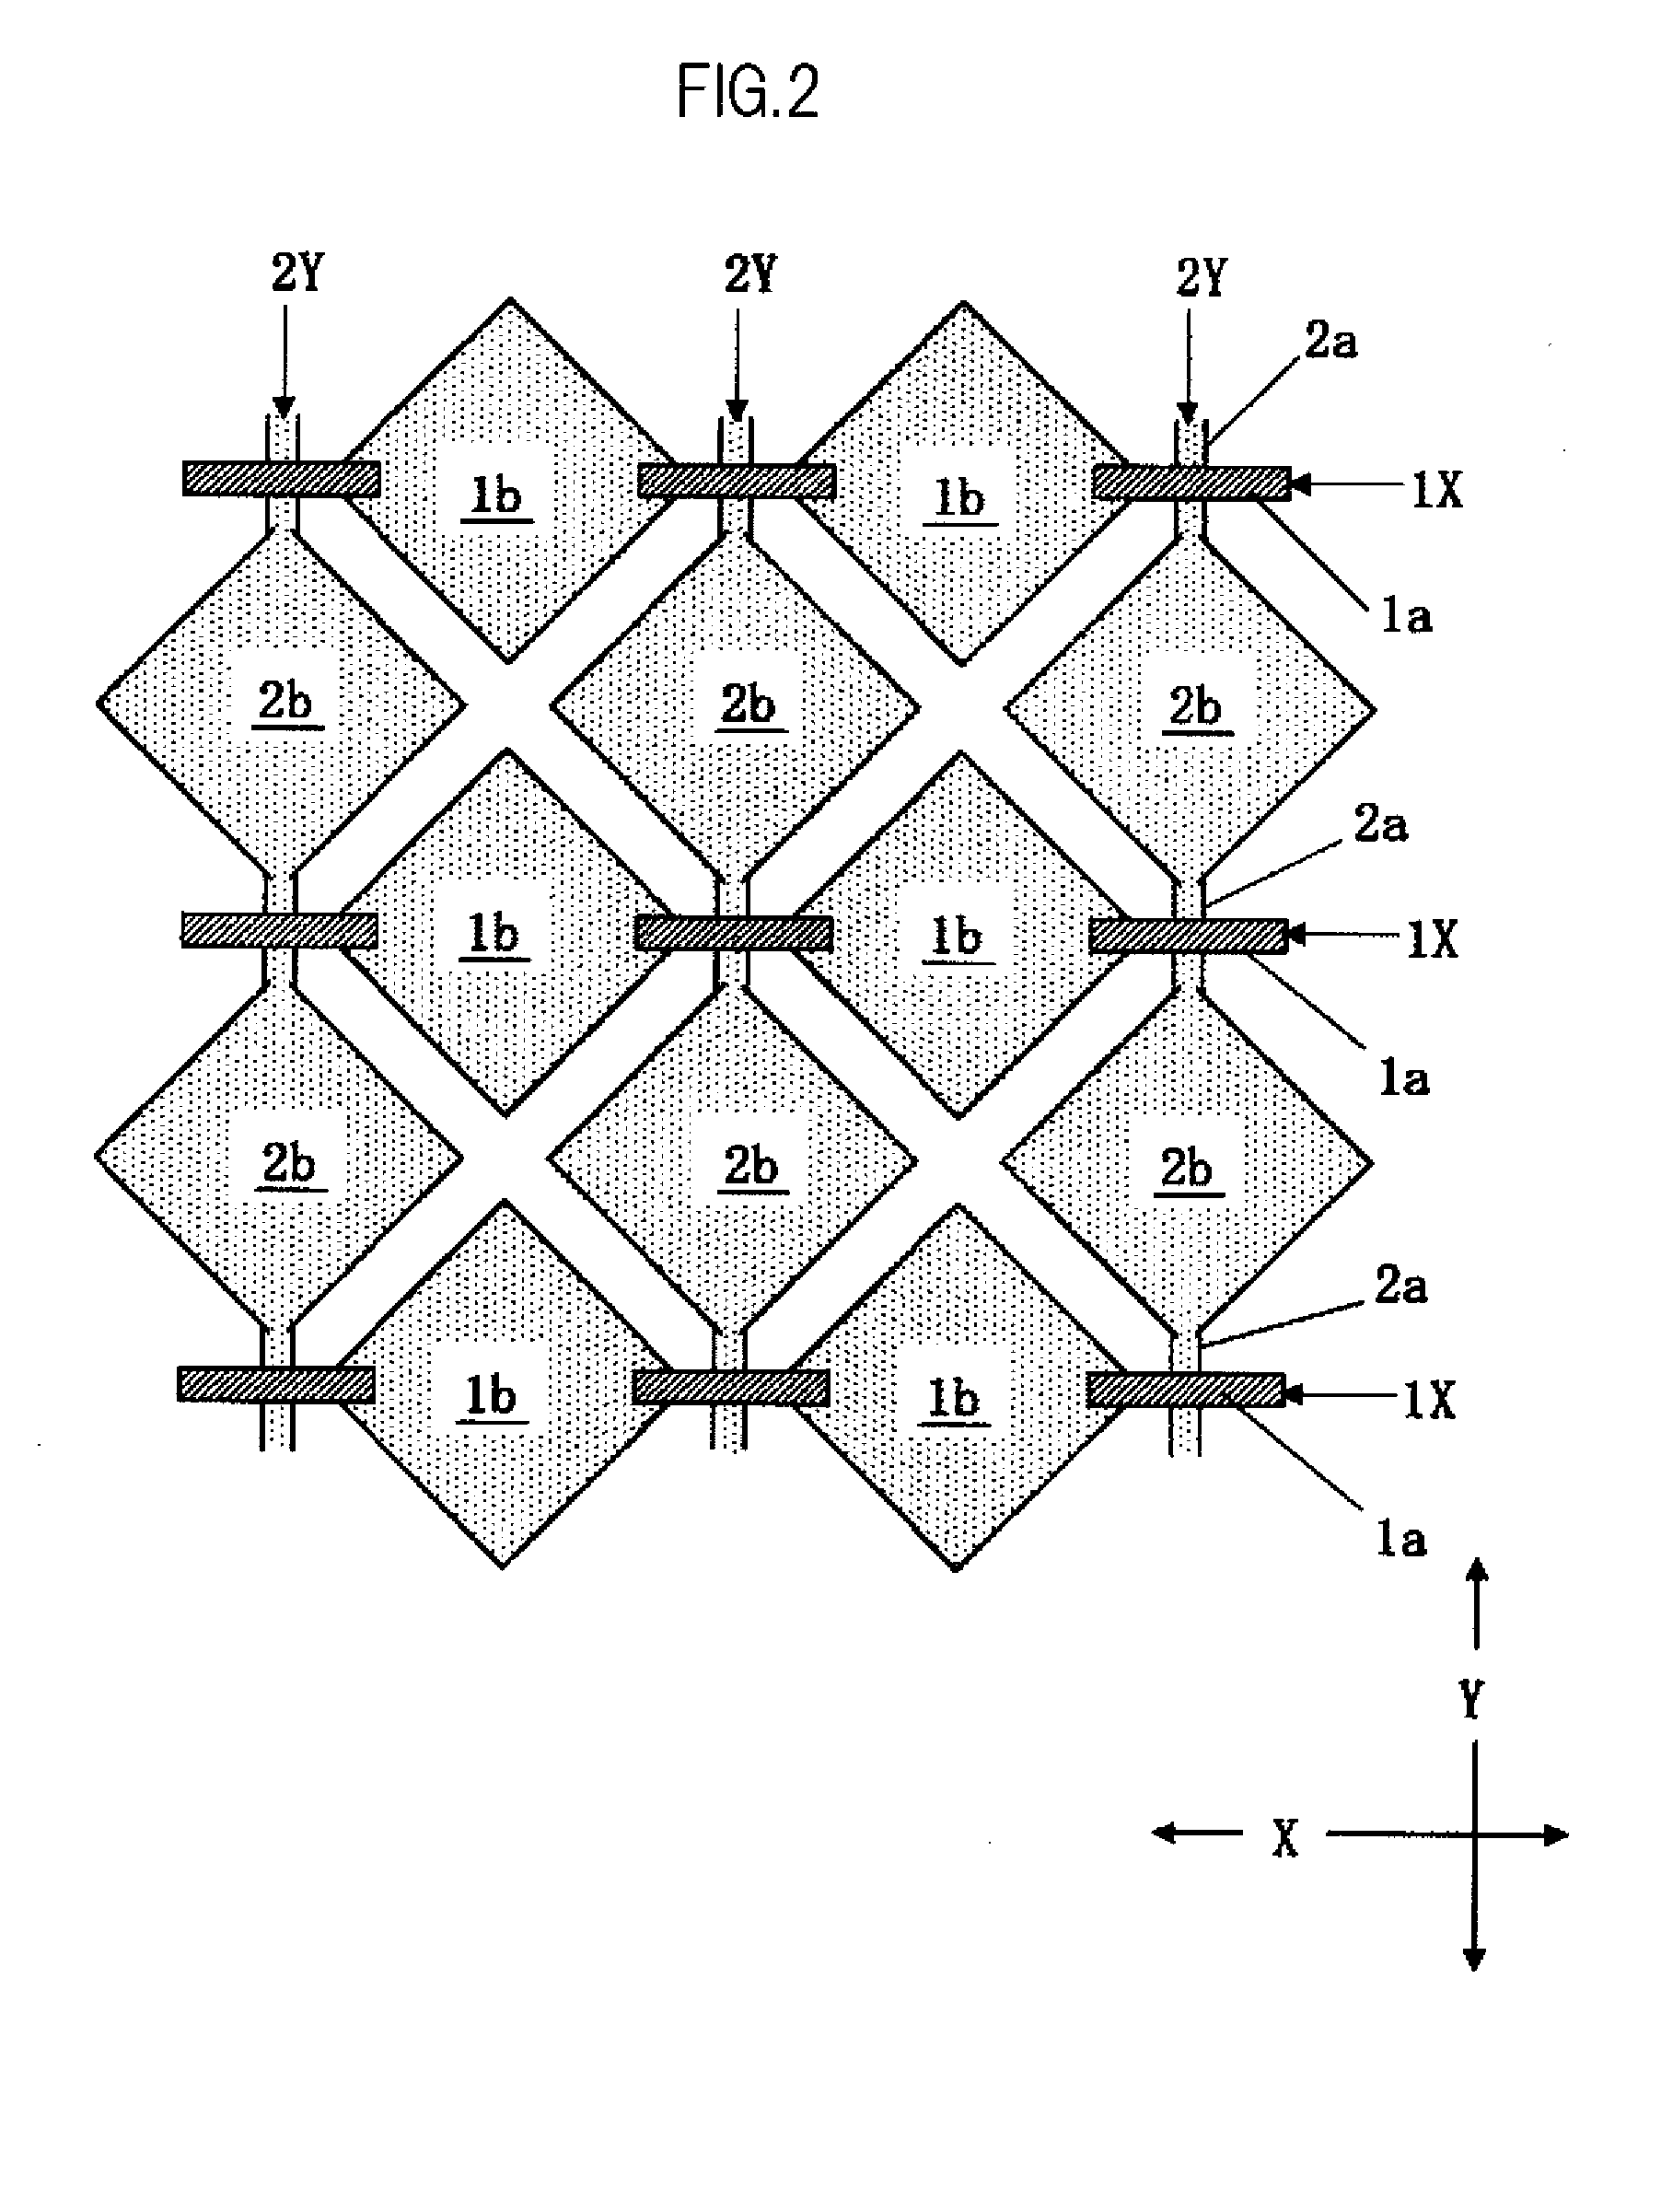 Display device with touch panel